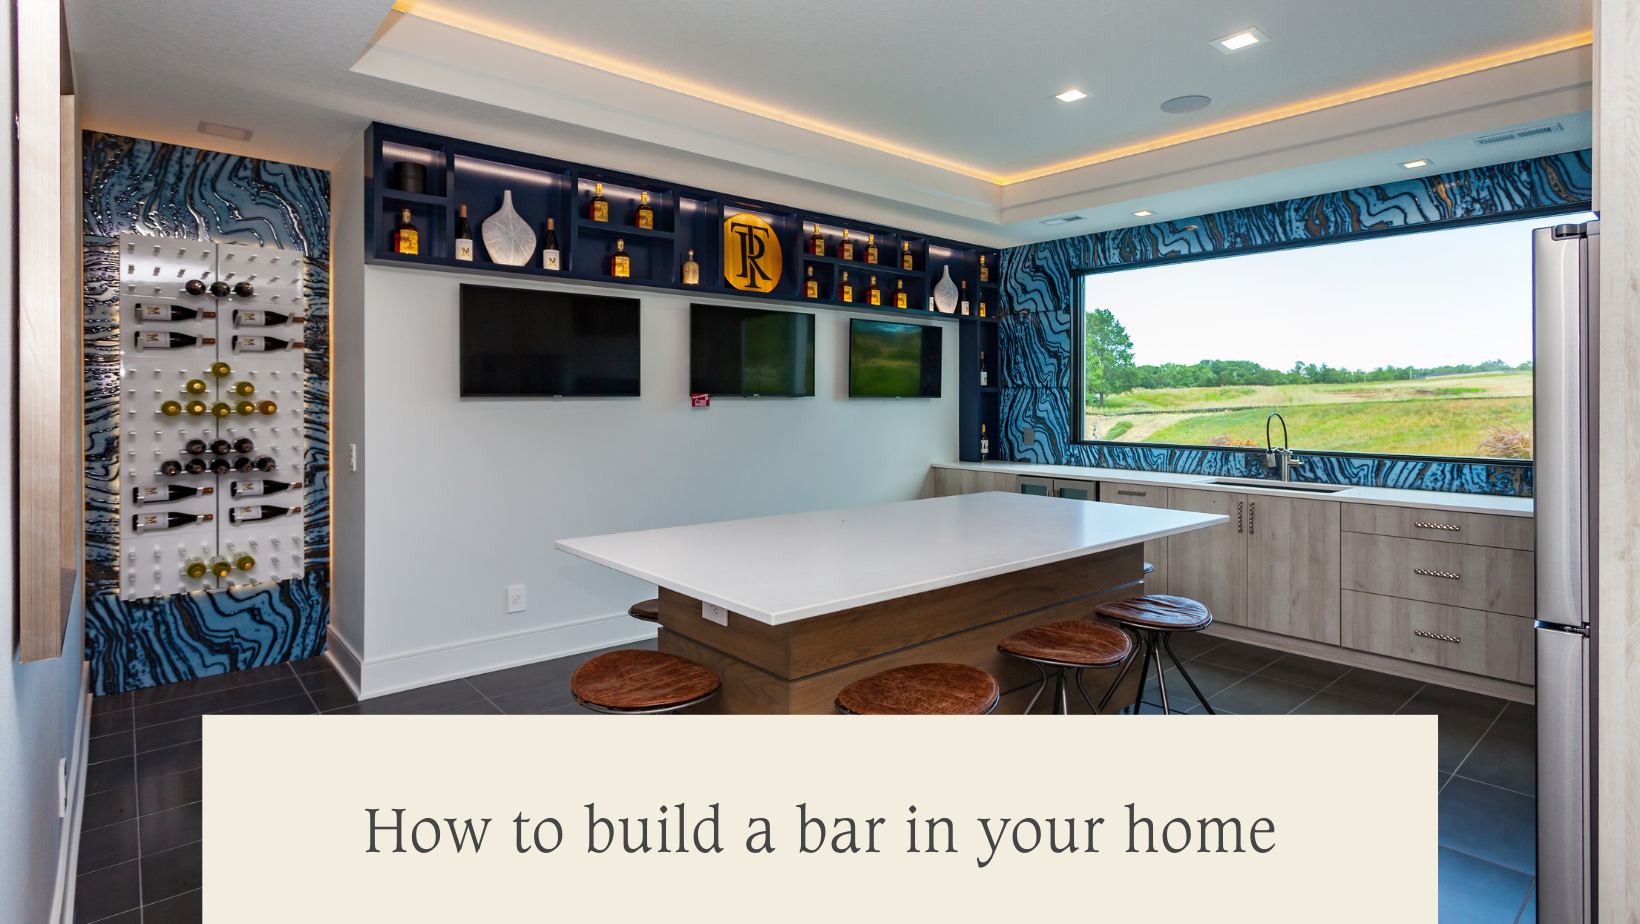 How to Build a Bar in Your Home